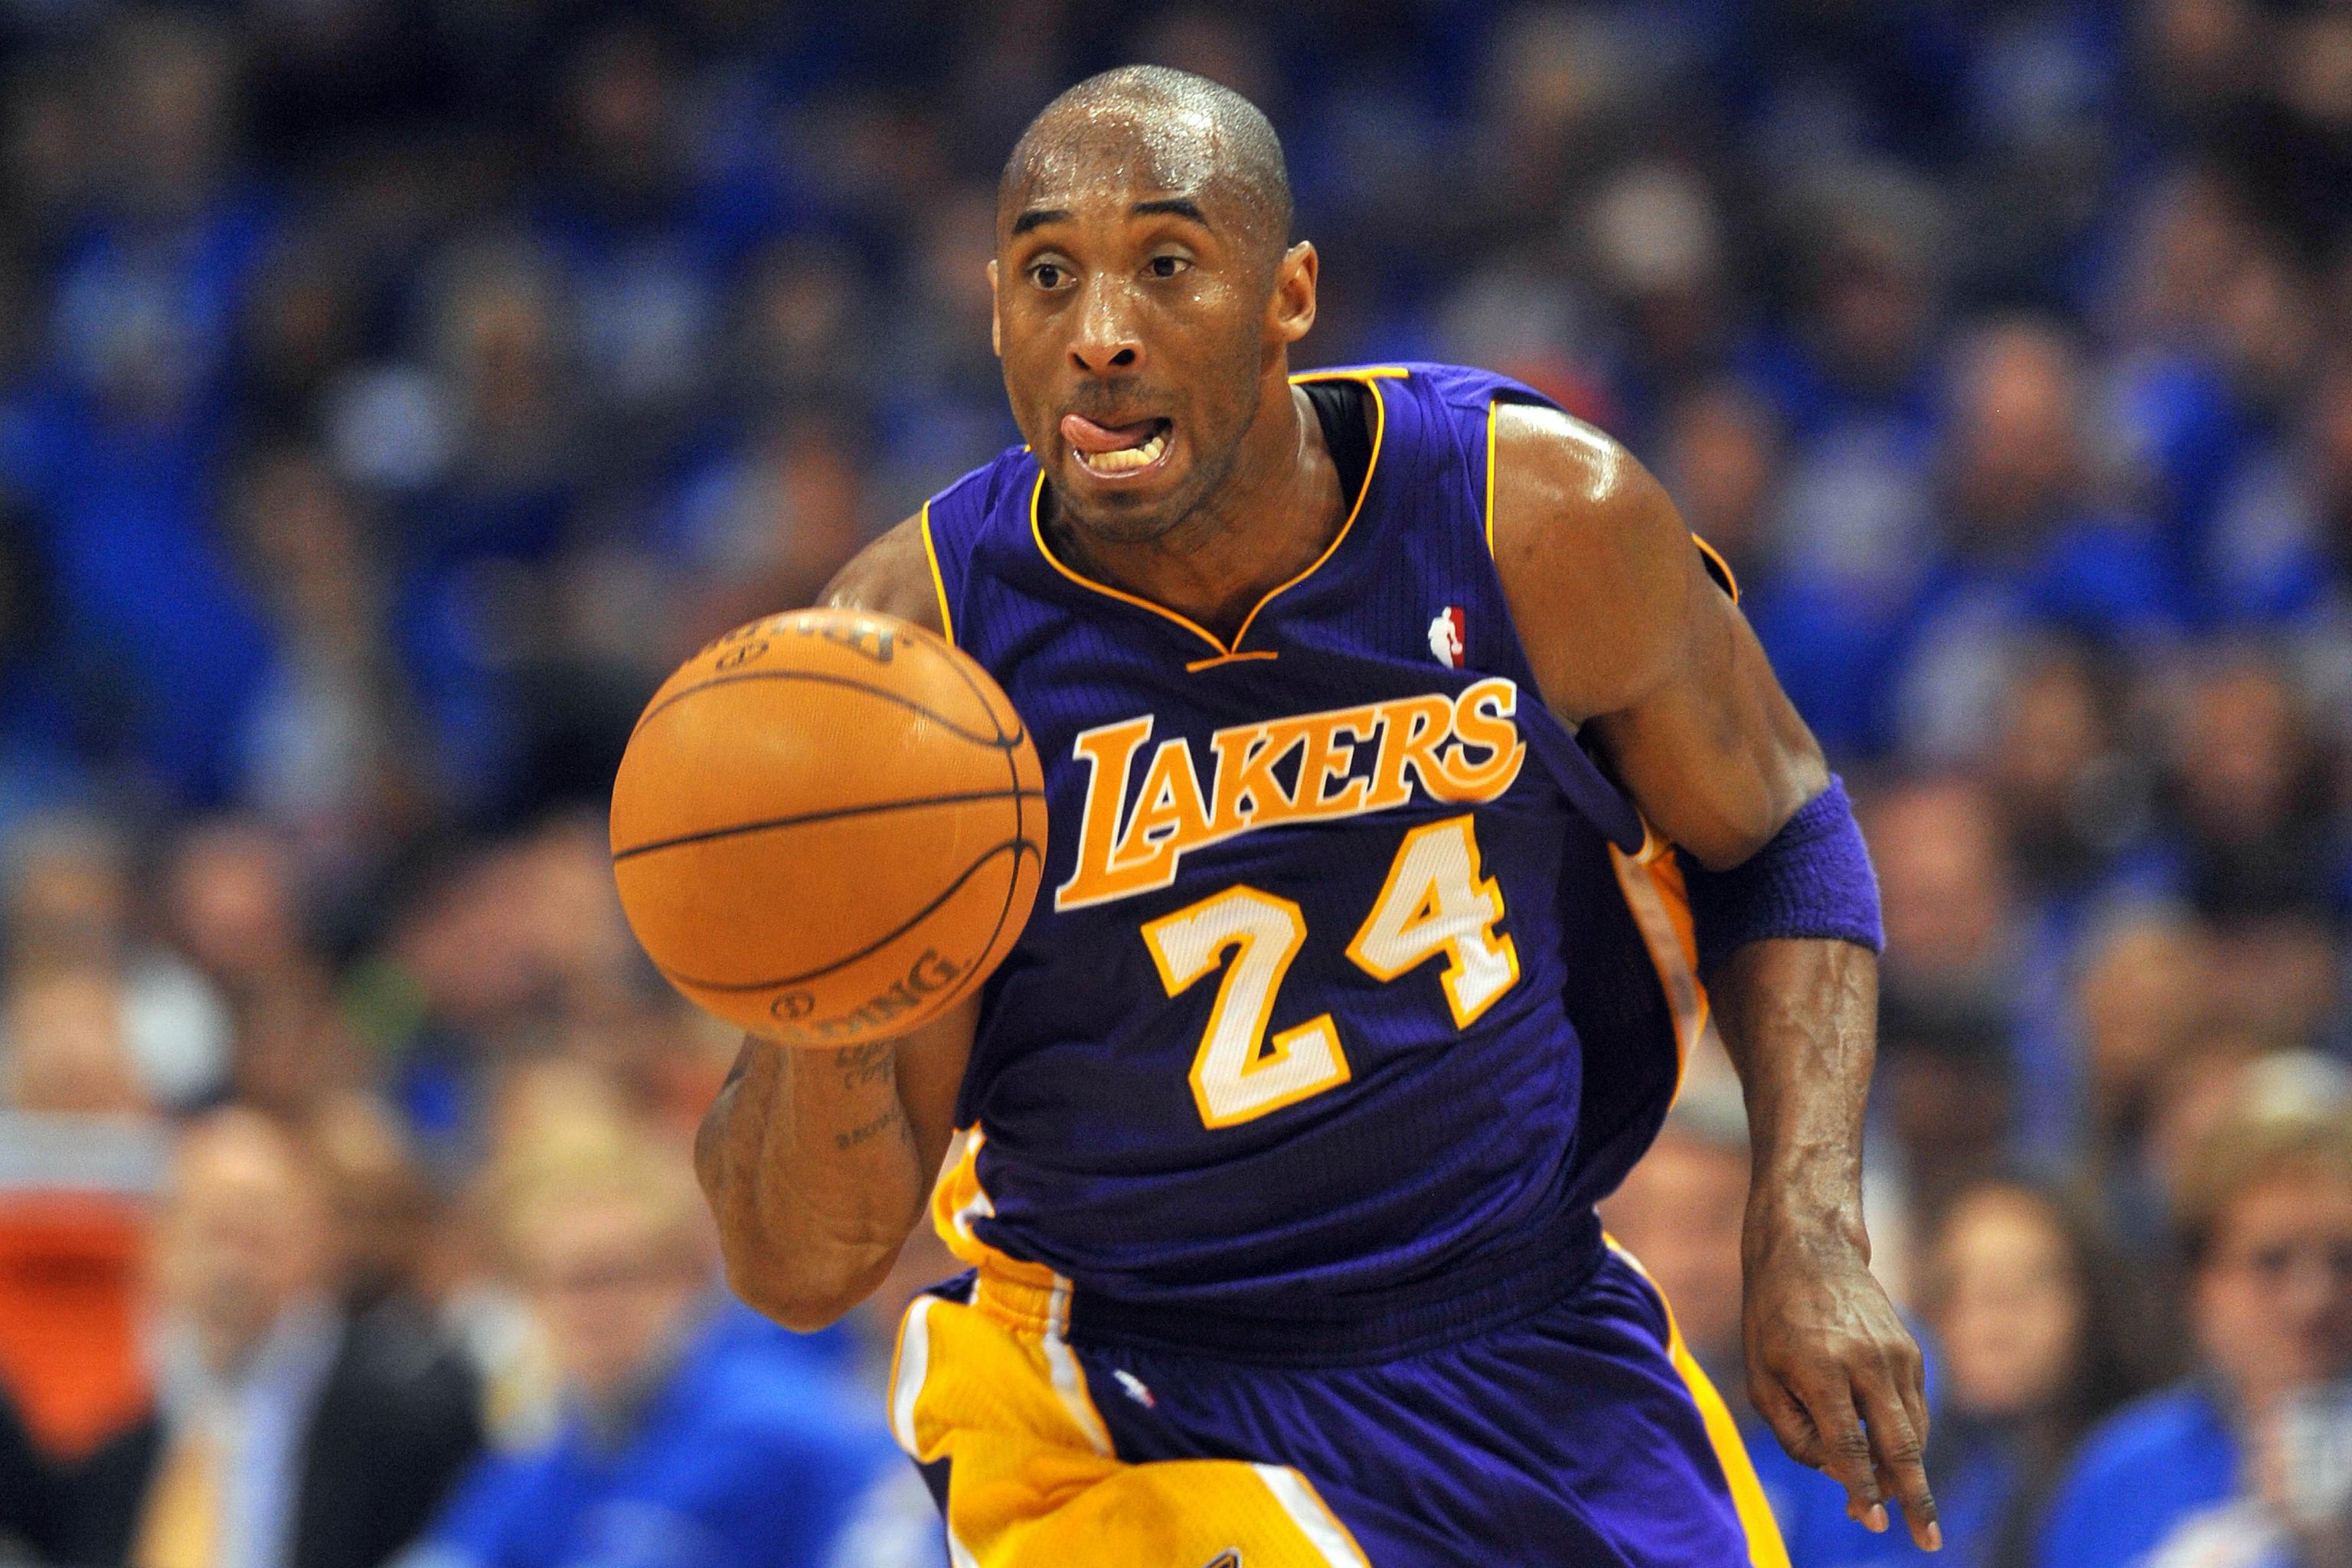 Bleacher Report - Kobe Bryant names the top 5 players he has faced